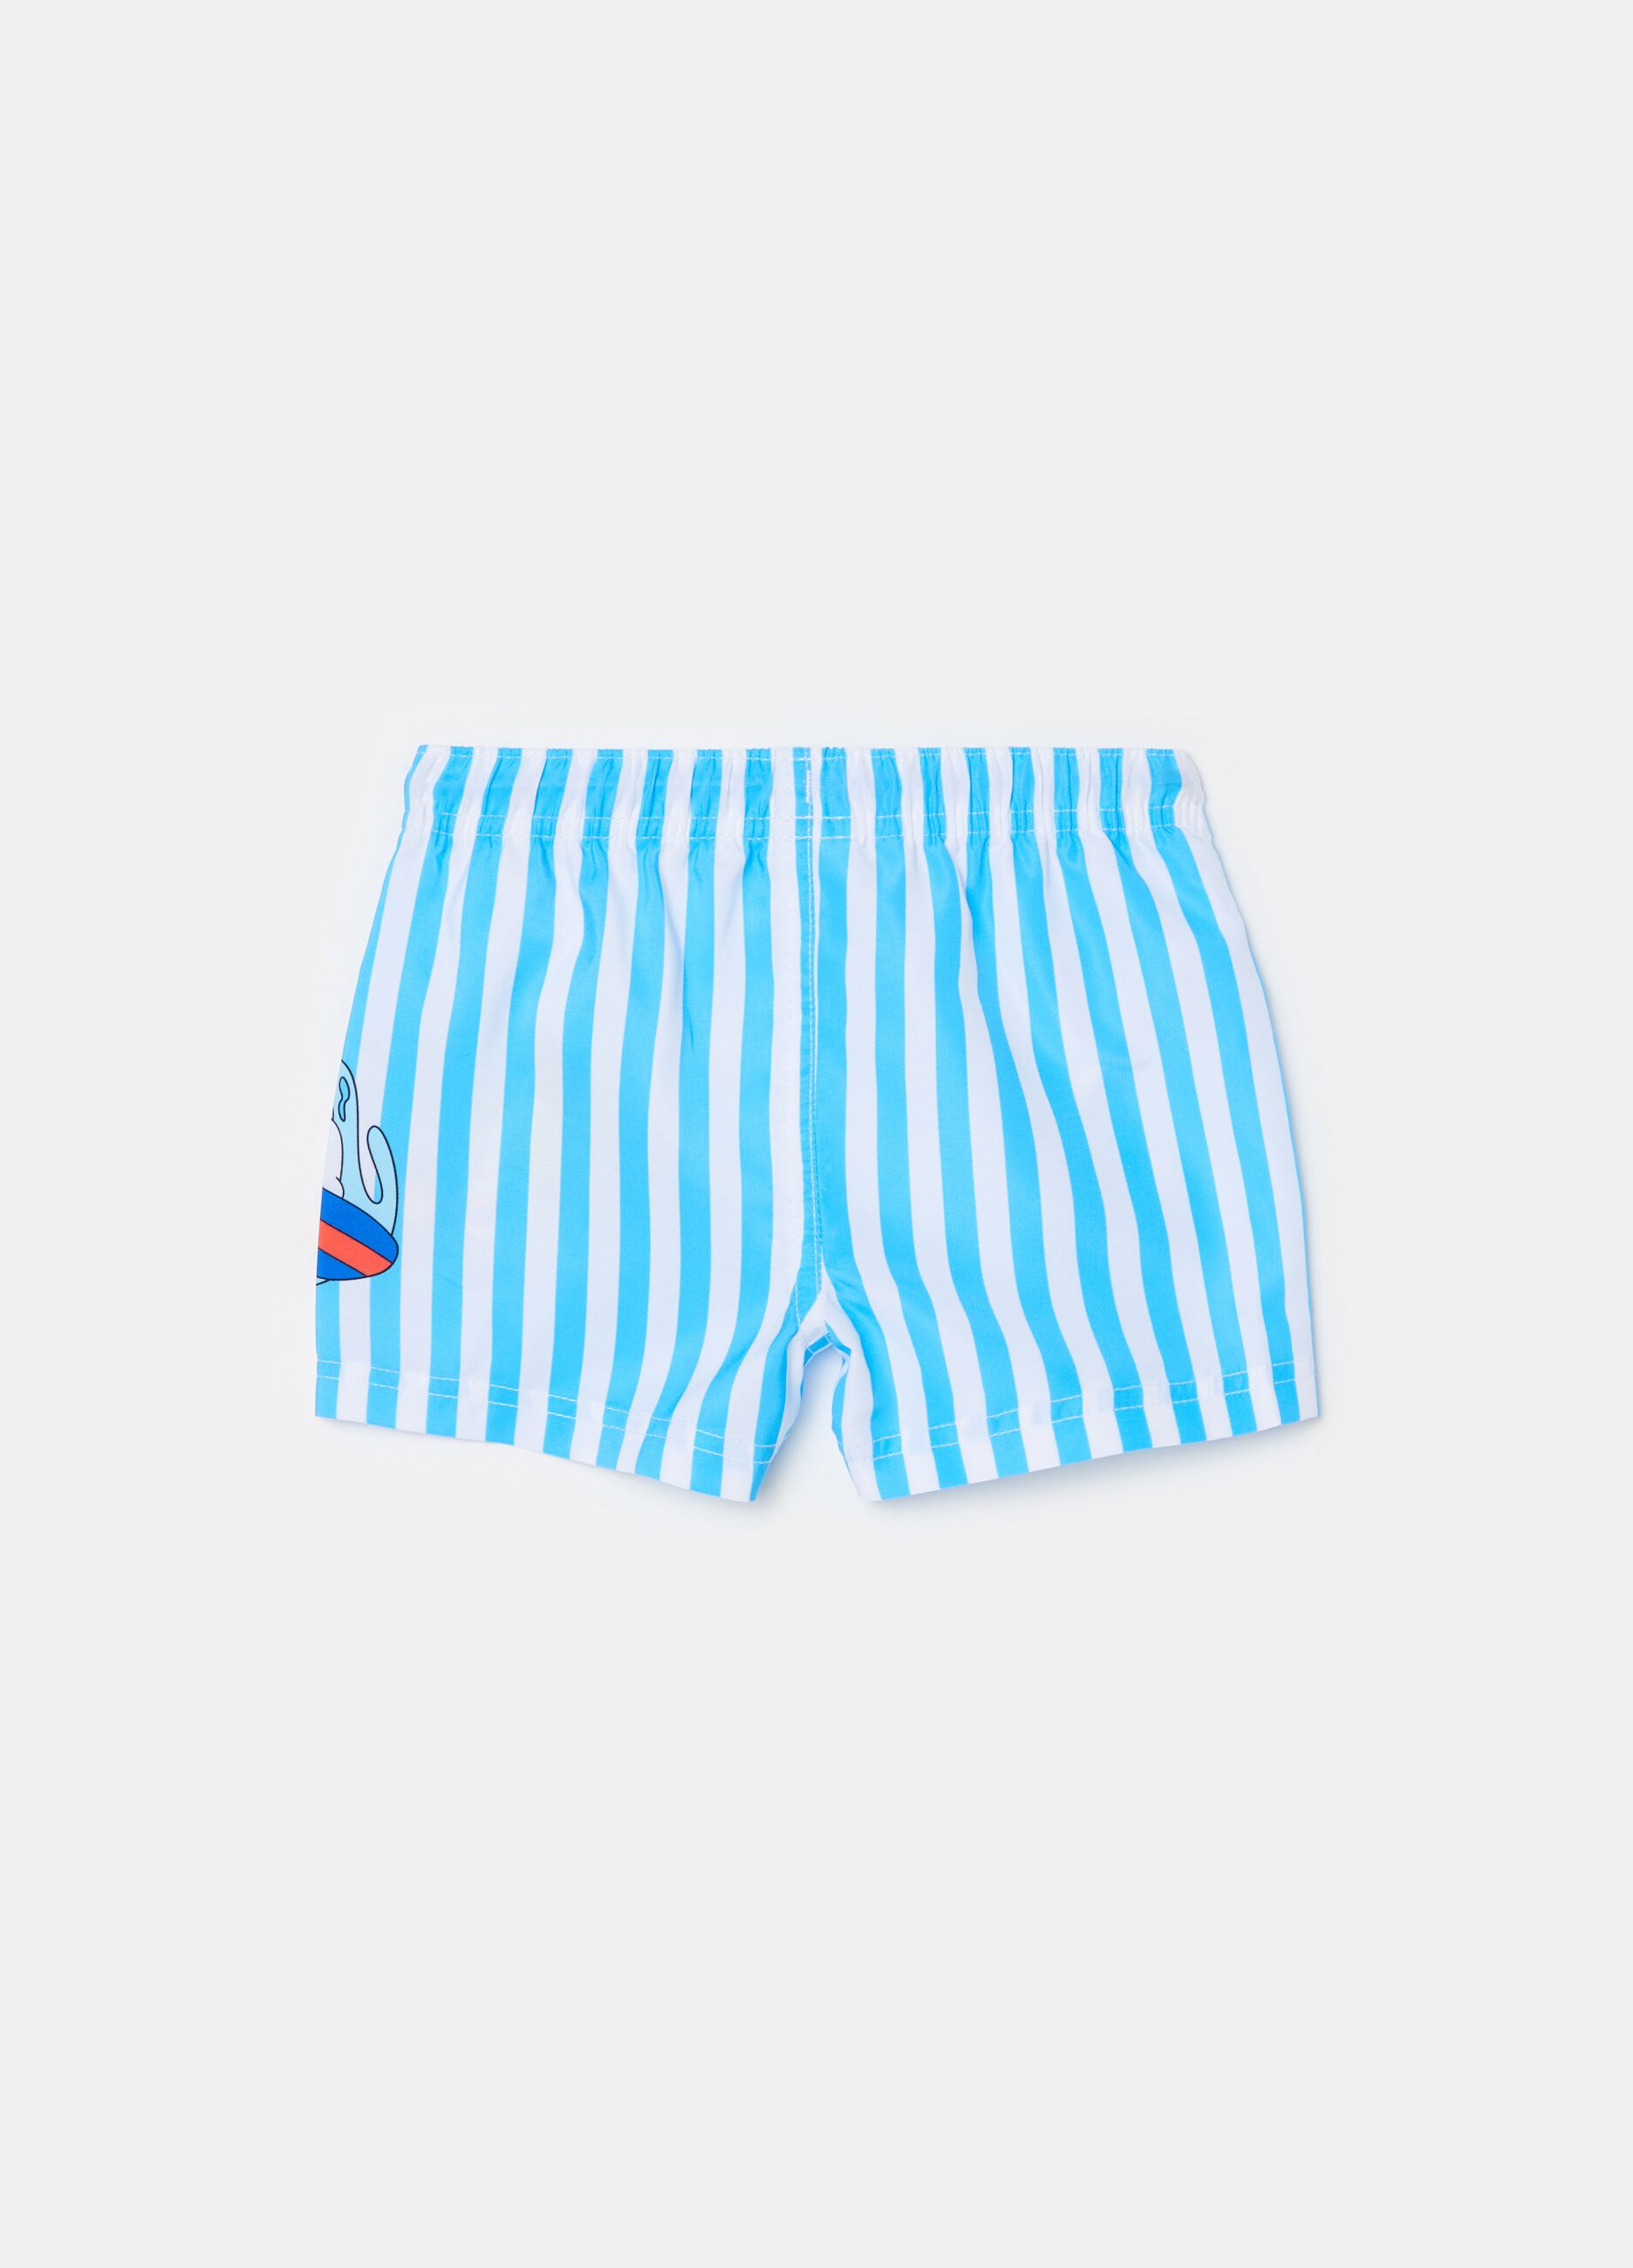 Striped swimming trunks with Donald Duck 90 print